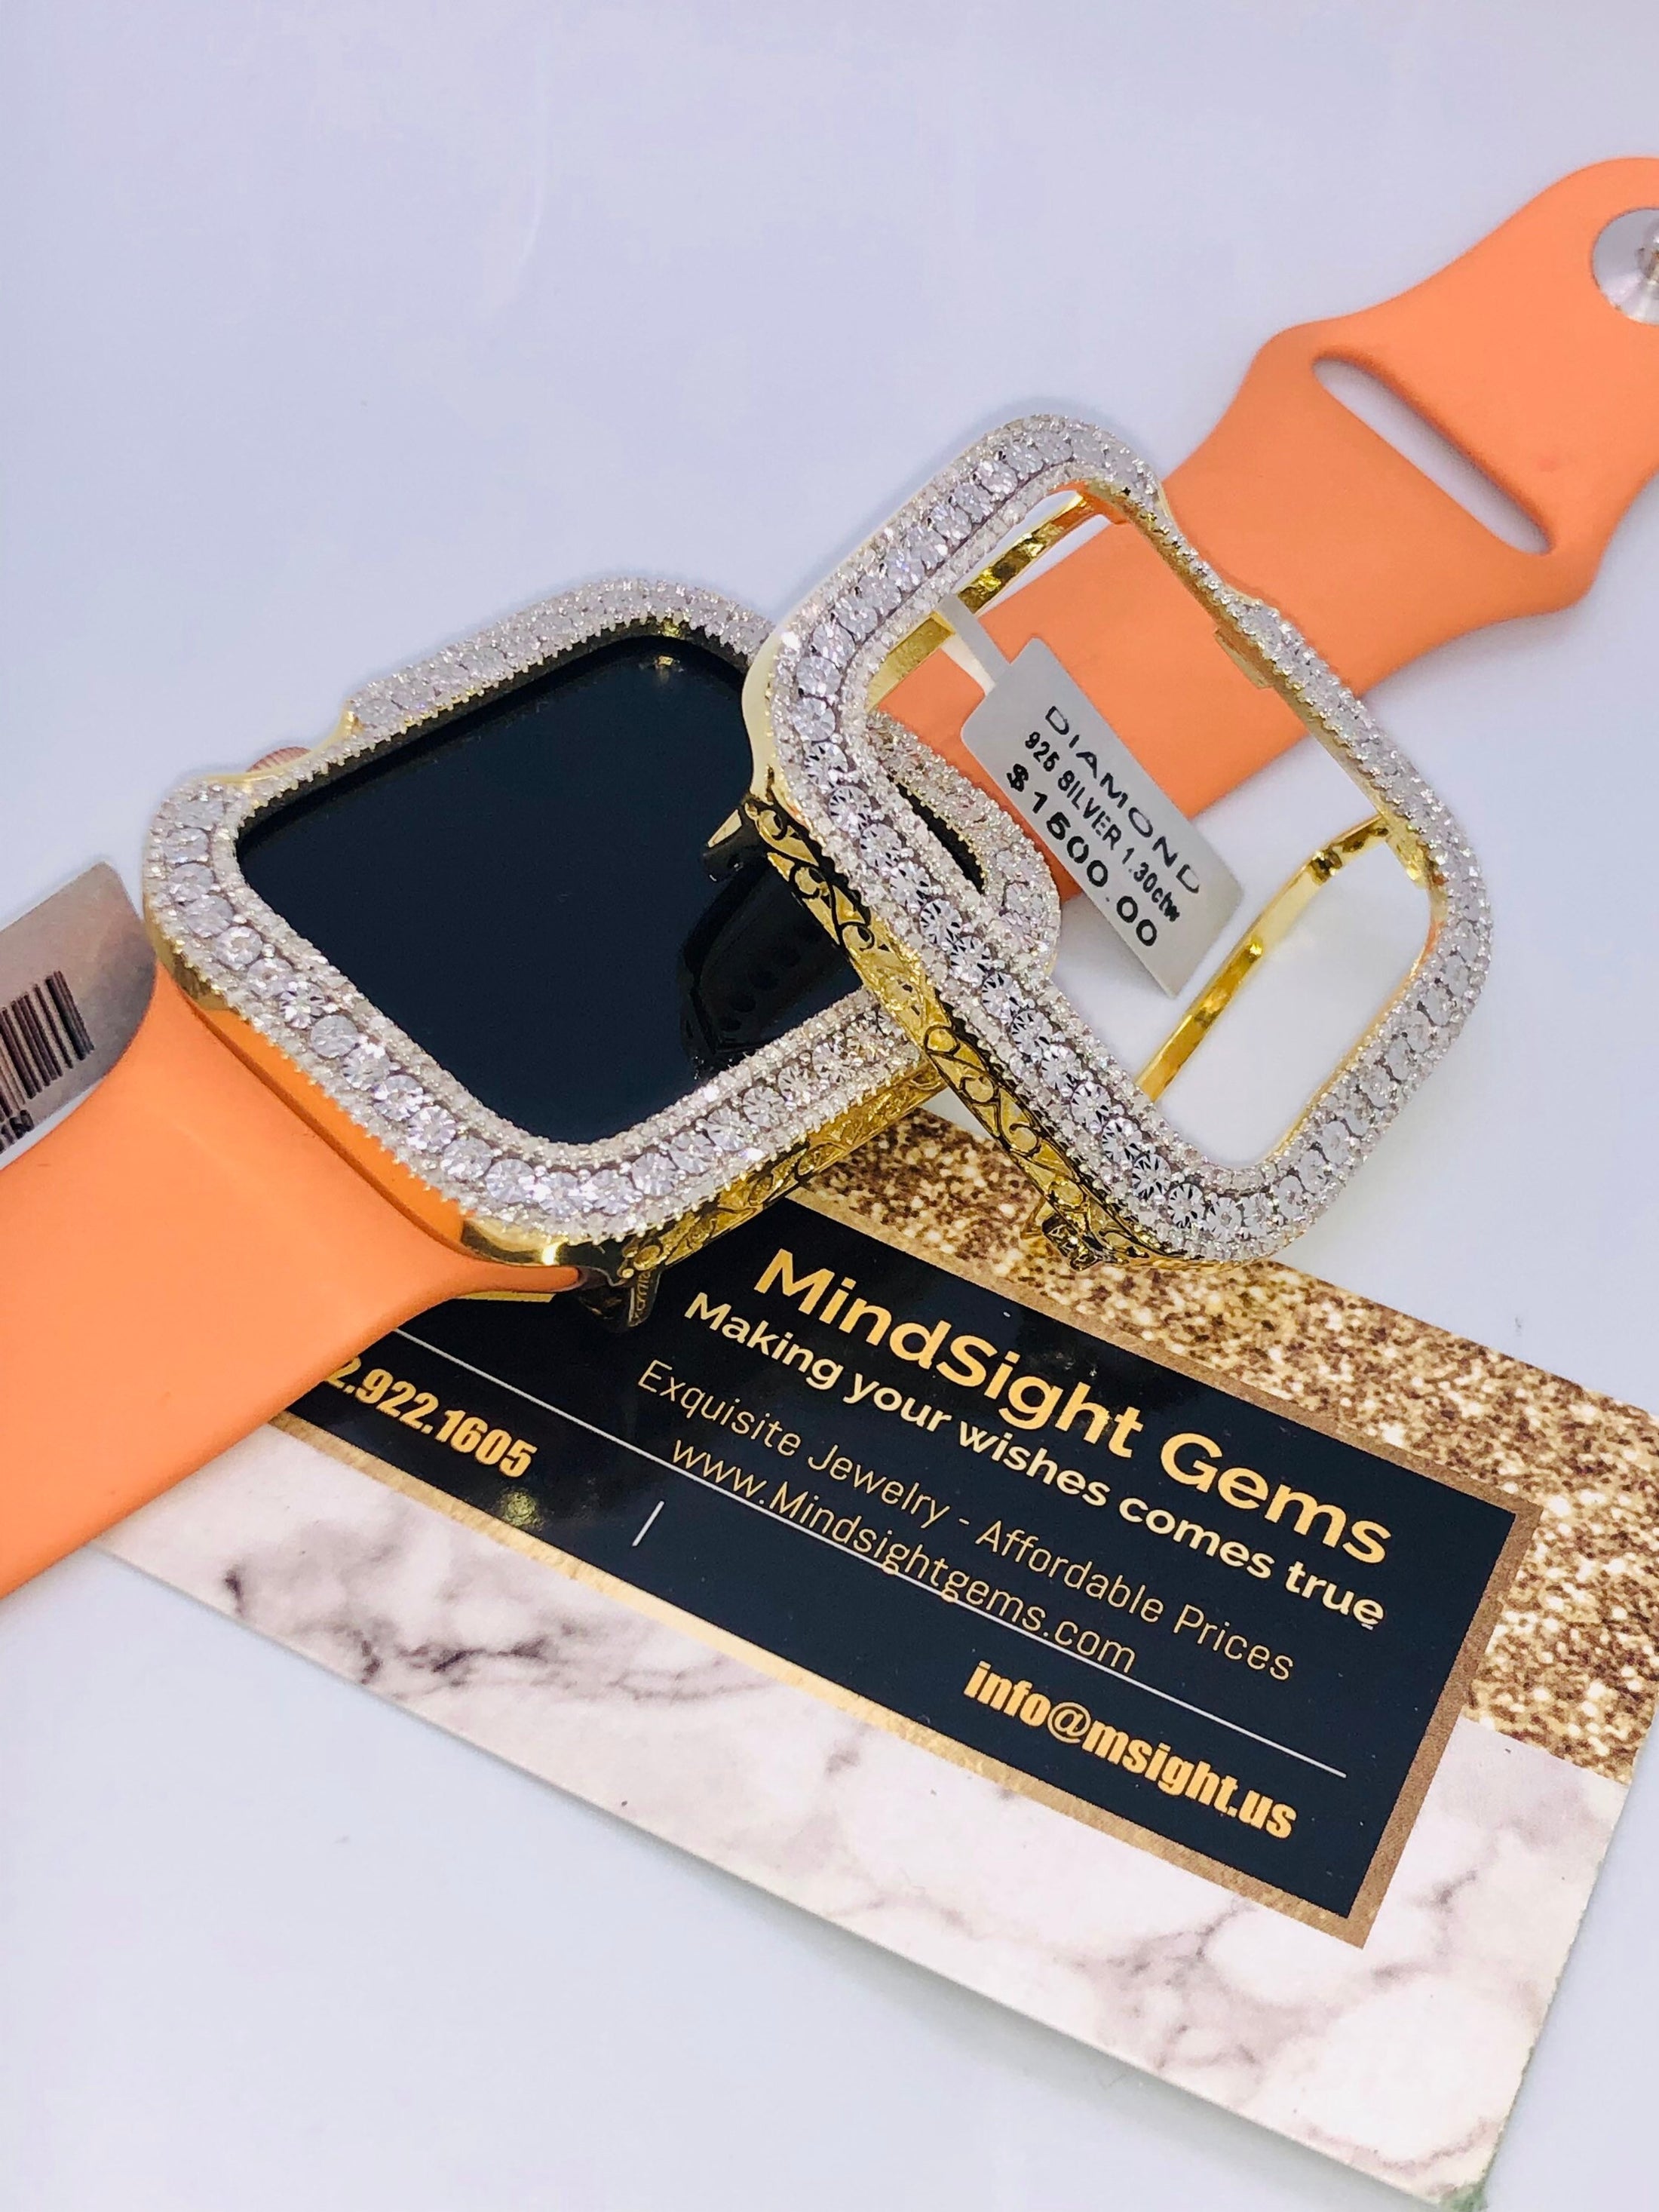 14k Gold Vermeil Real Genuine Authentic Diamond Apple Watch Bezel Series 4,5,6,7,8, ALL Sizes NOT Lab Made 100% Real Diamonds, new series